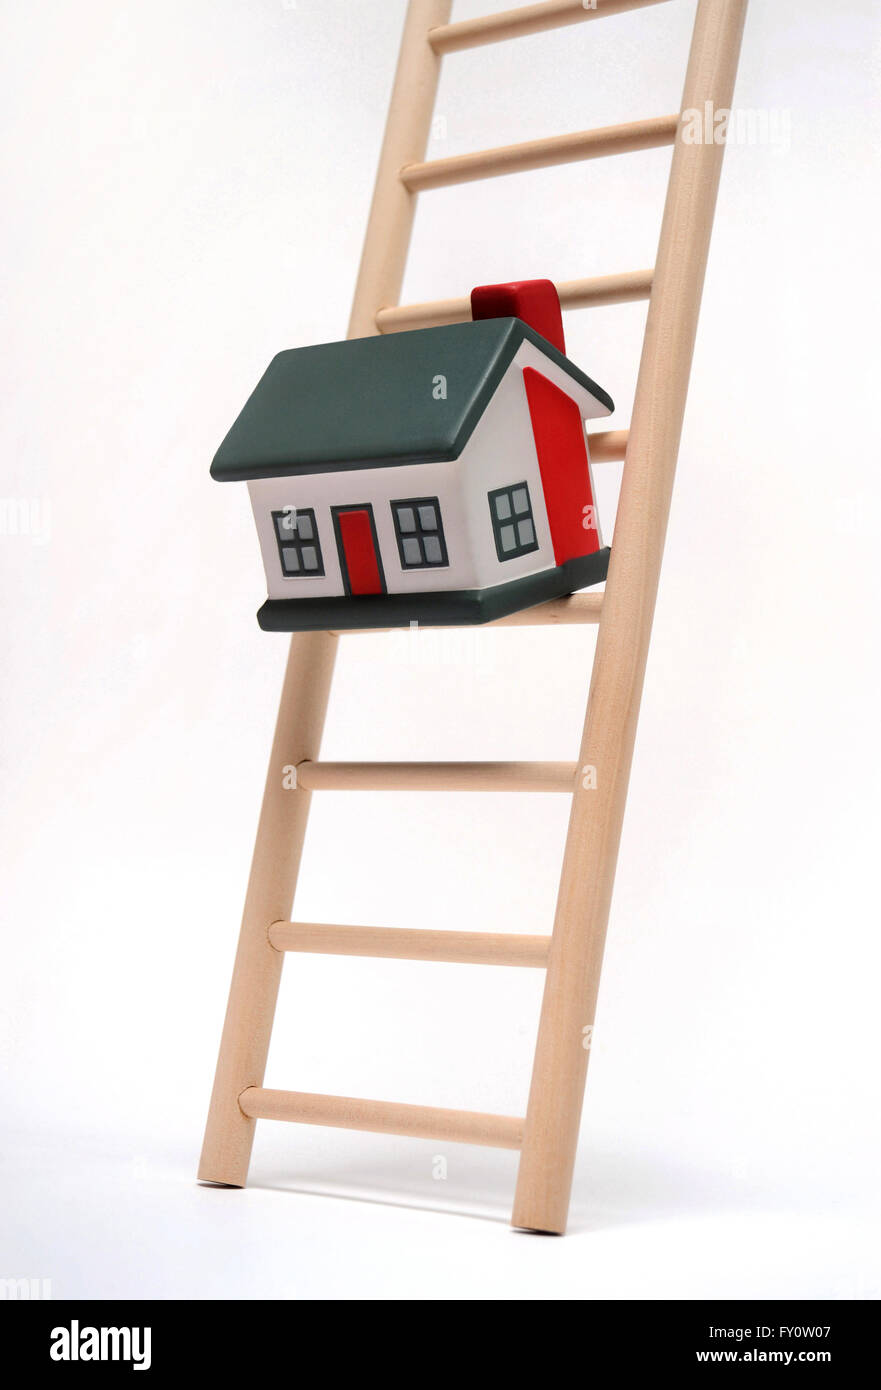 HOUSE ON LADDER  RE THE HOUSING LADDER HOUSE BUYING MARKET HOMES FIRST TIME BUYERS MORTGAGES WAGES JOBS INCOMES HOME PROPERTY UK Stock Photo